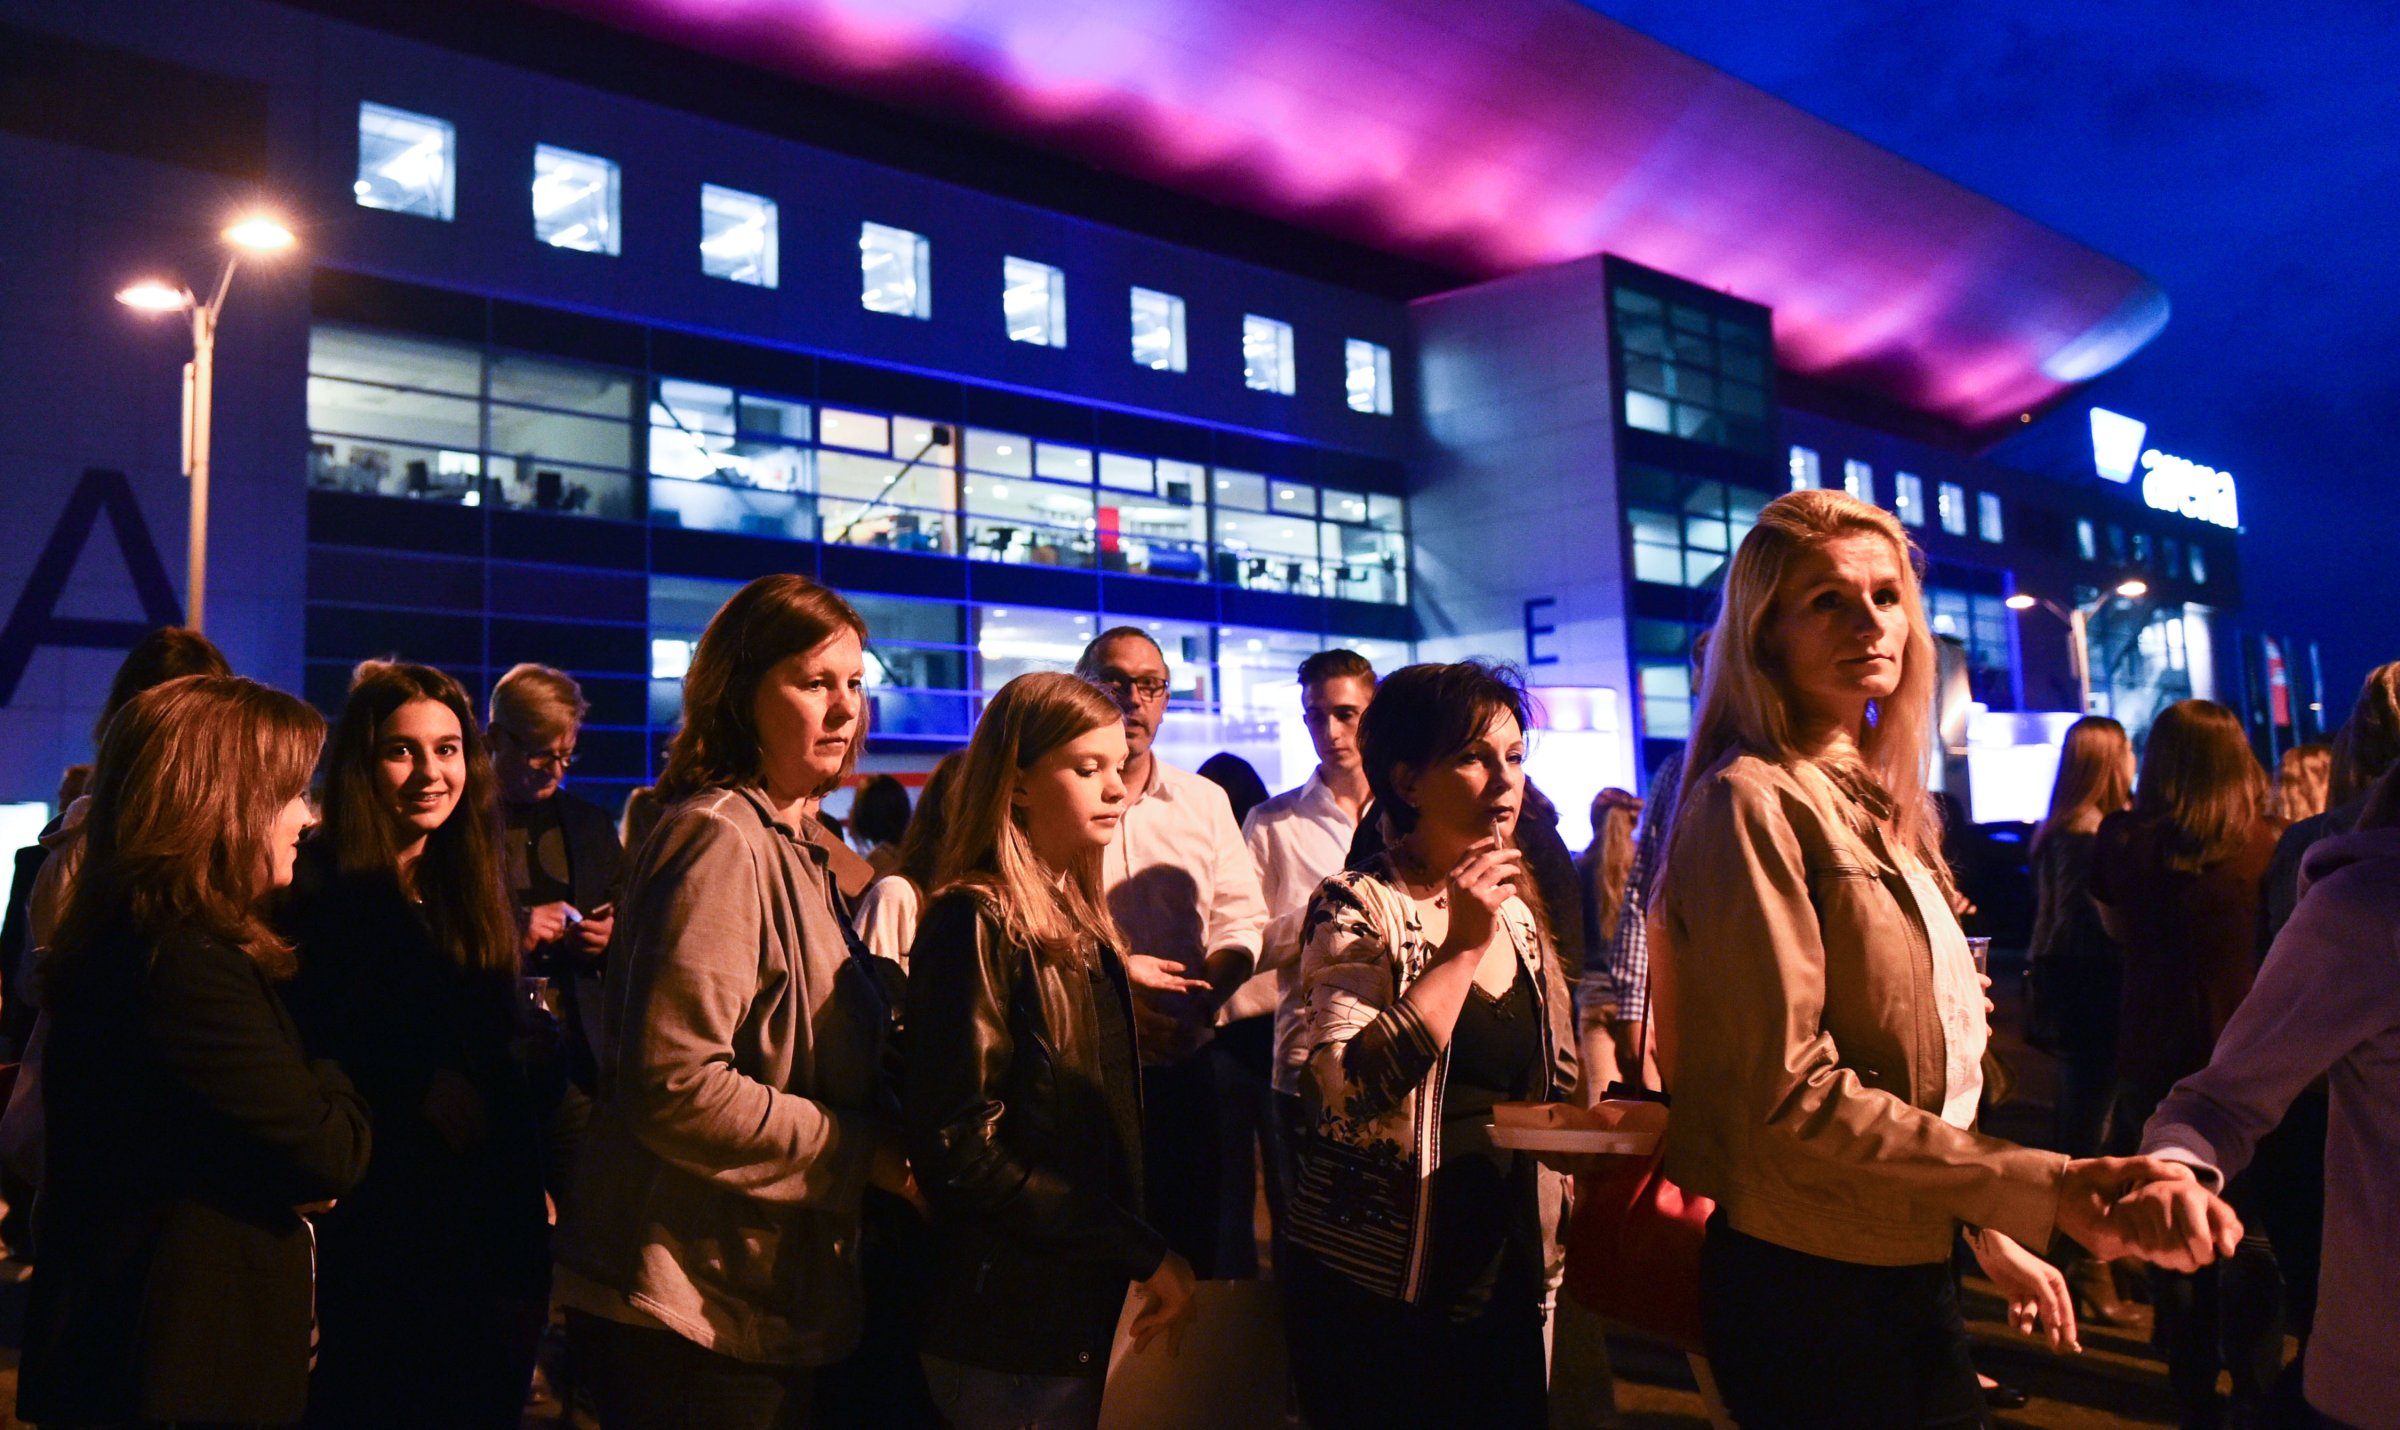 Members of the audience leave the SAP-Arena venue after the German television casting show "Germany's Next Topmodel" is cancelled in Mannheim, Germany on May 14, 2015.